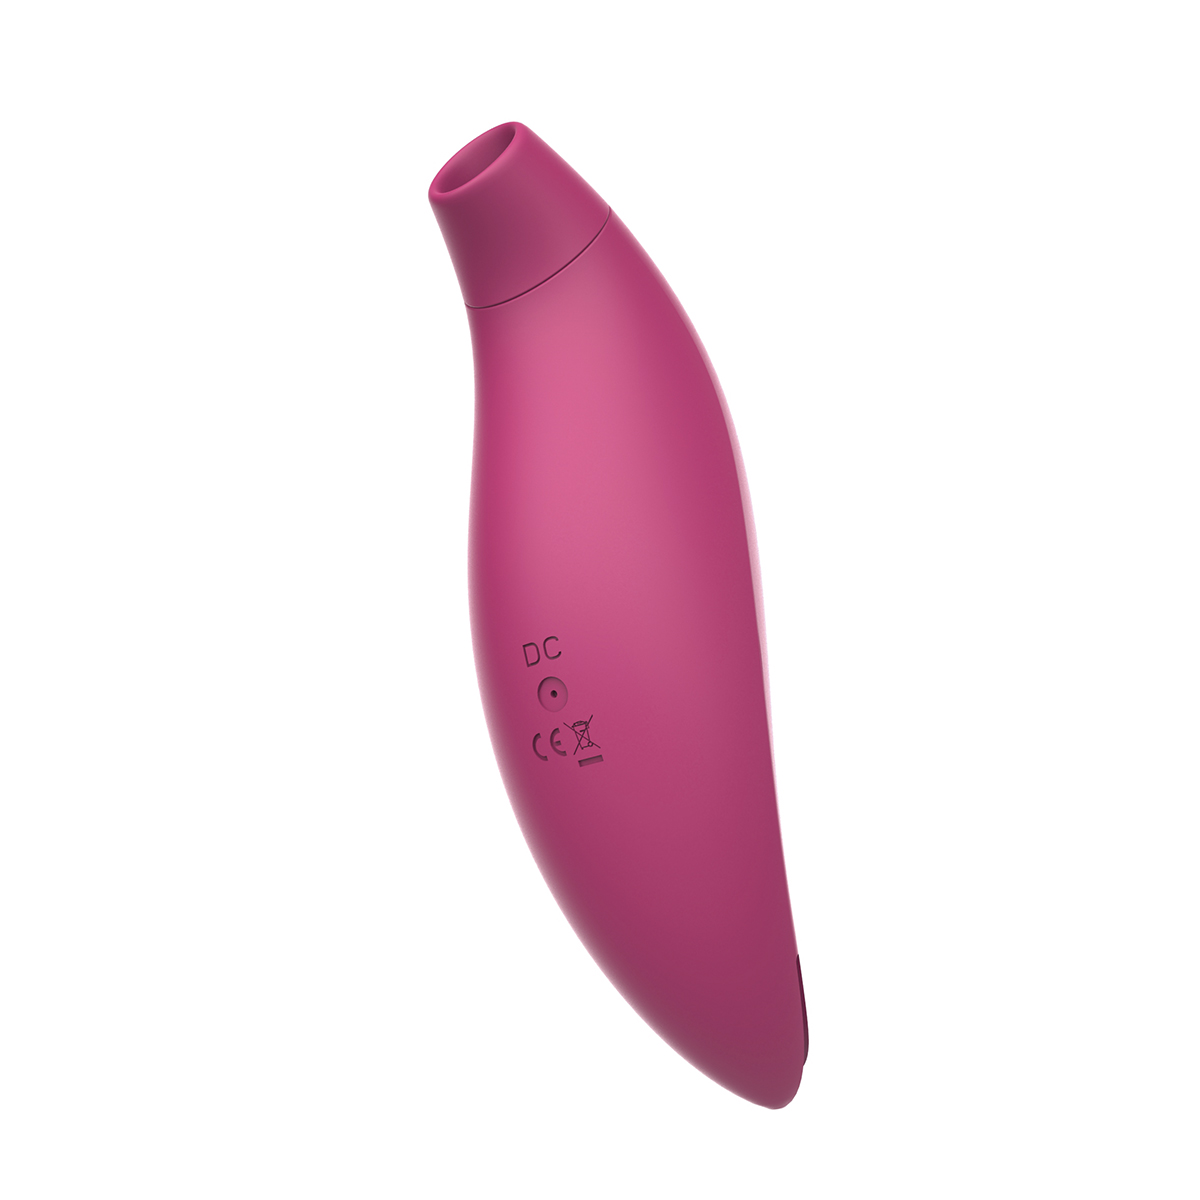 2 in 1 Bottom vibrating and Sucking Vibrator